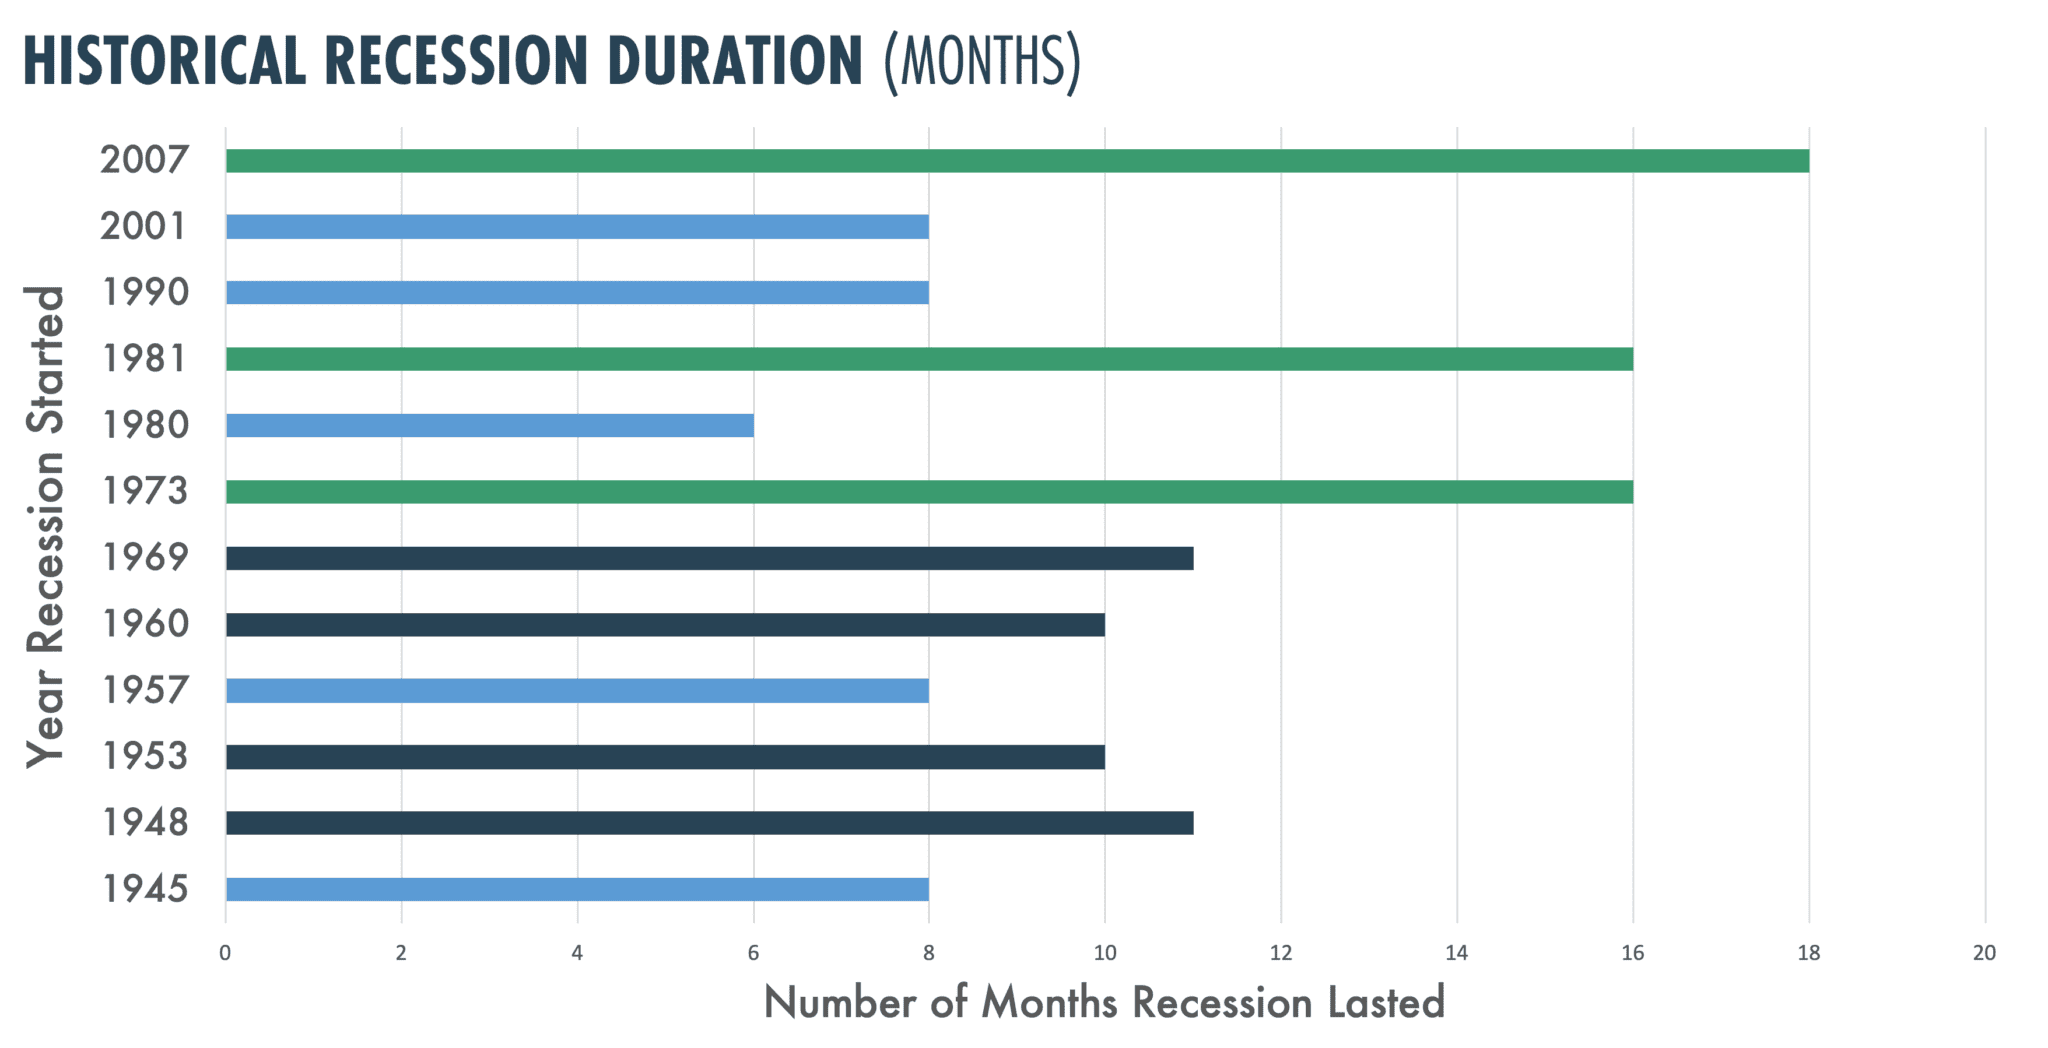 Historical Recession Duration